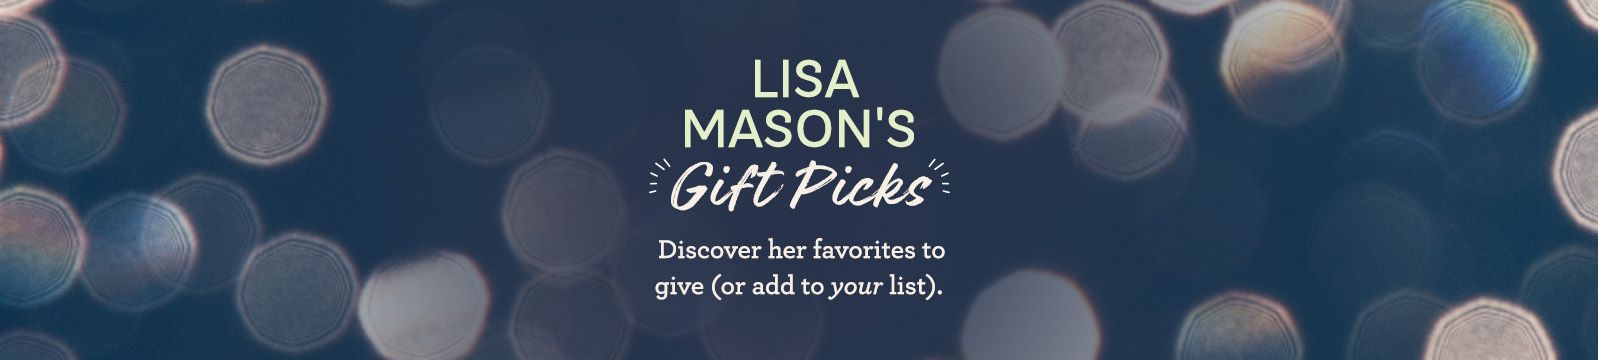 Lisa Mason's Gift Picks  Discover her favorites to give (or add to your list).